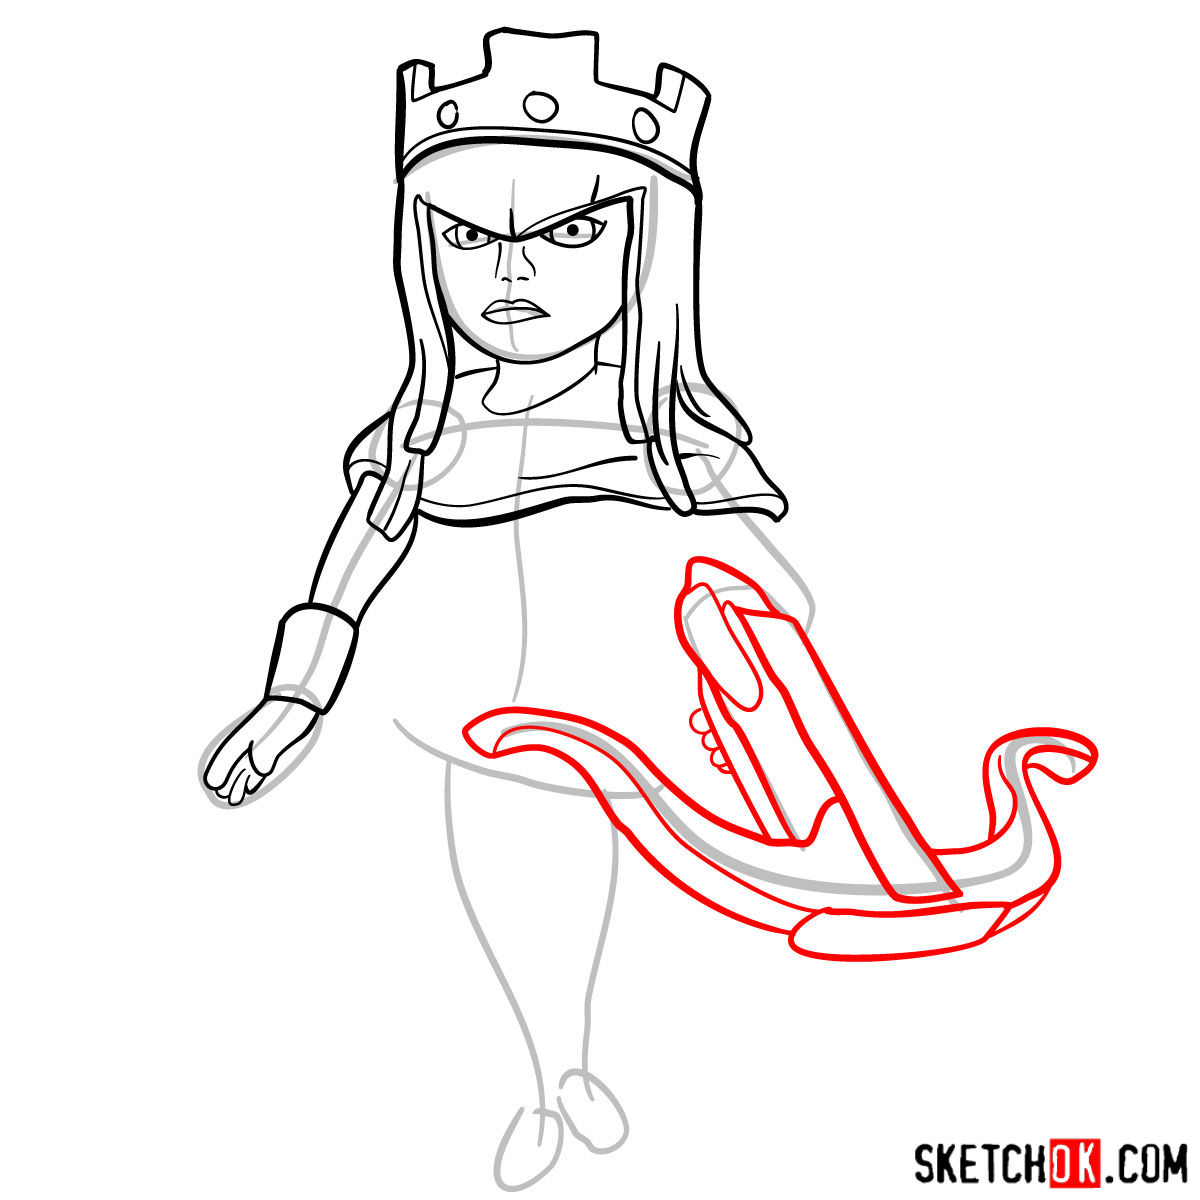 How to draw Archer Queen from Clash of Clans game - step 08